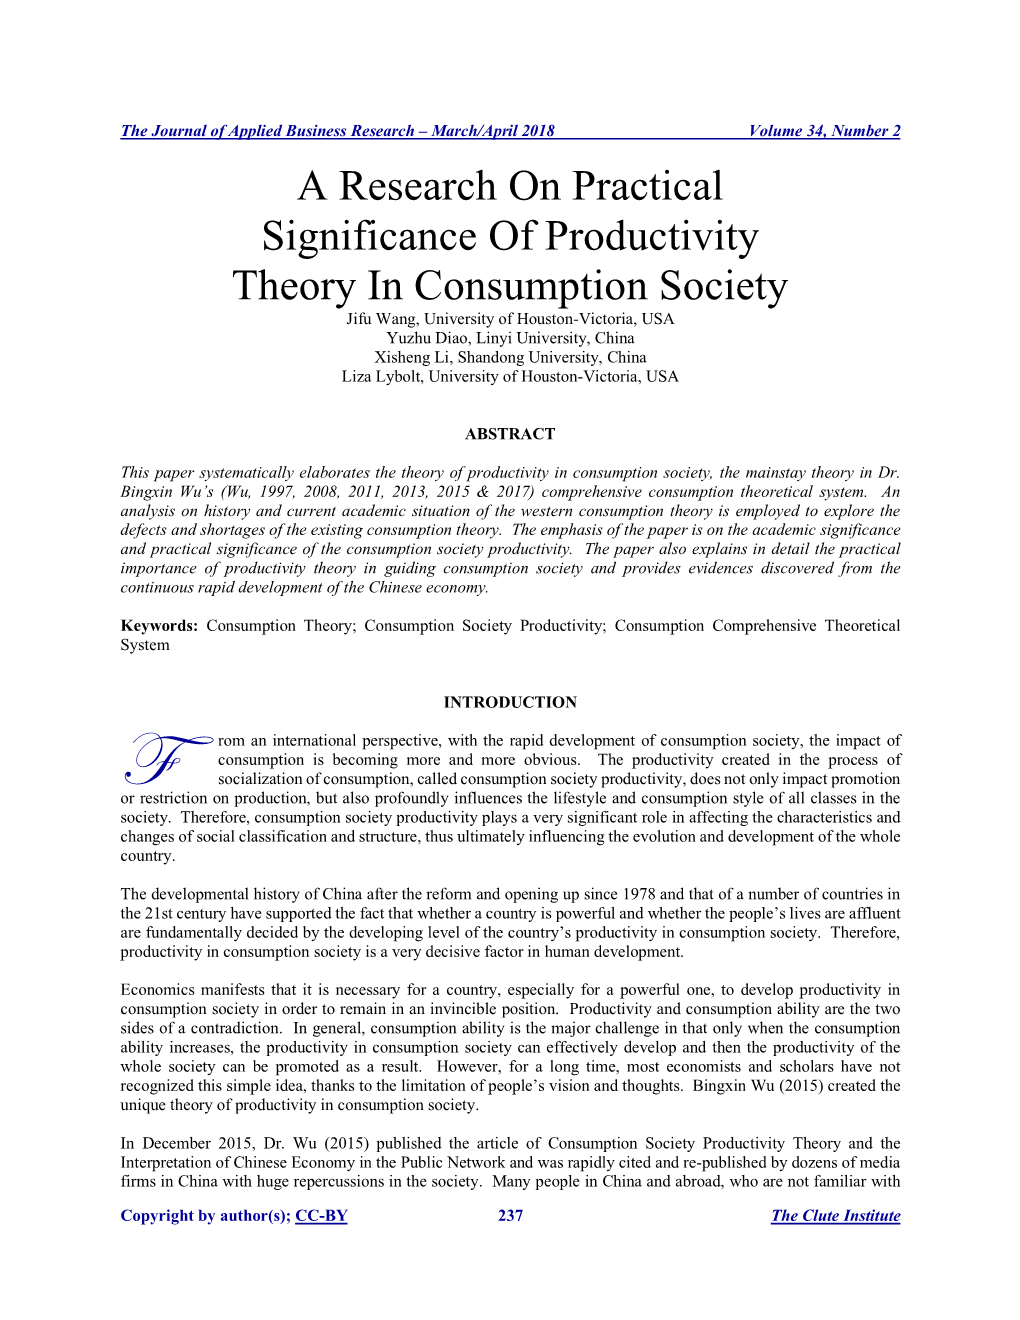 A Research on Practical Significance of Productivity Theory In